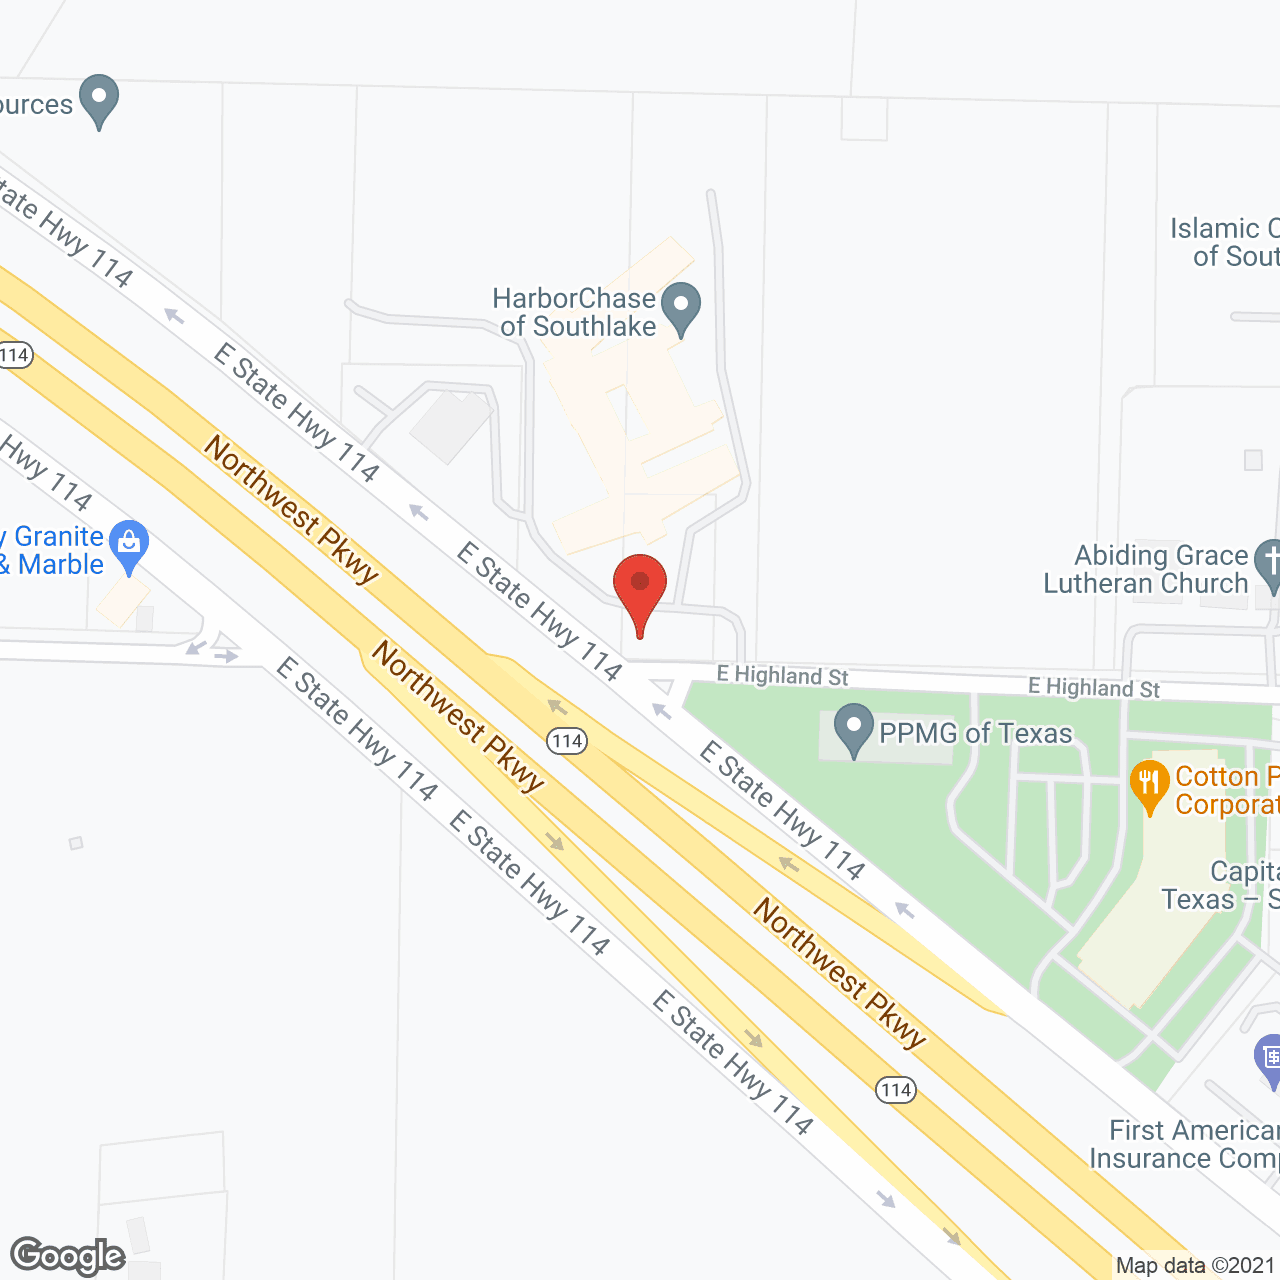 HarborChase of Southlake in google map